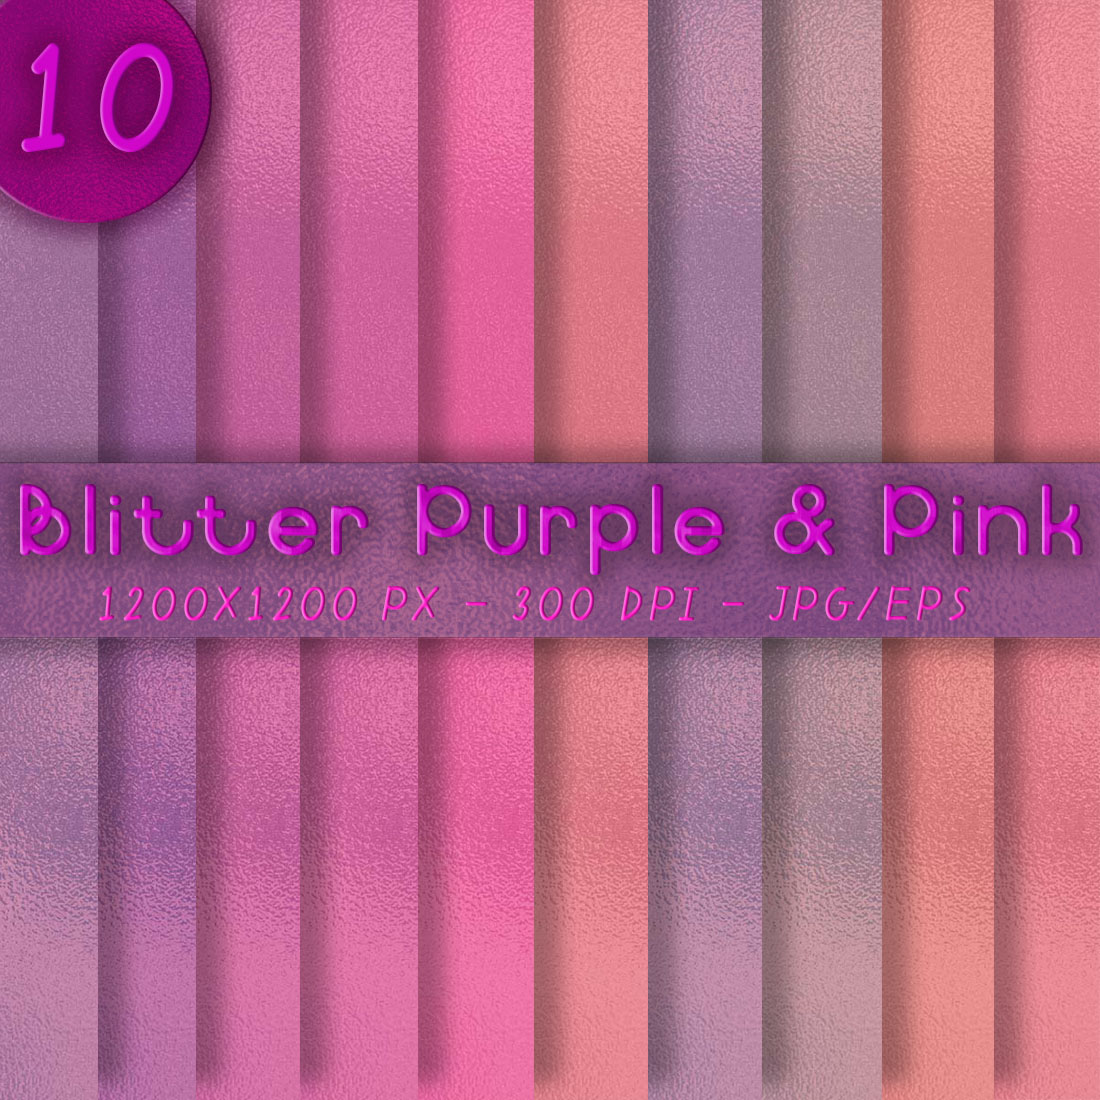 Purple and Pink Glitter there are 10 sets designed by choosing good colors and suitable for all circles.